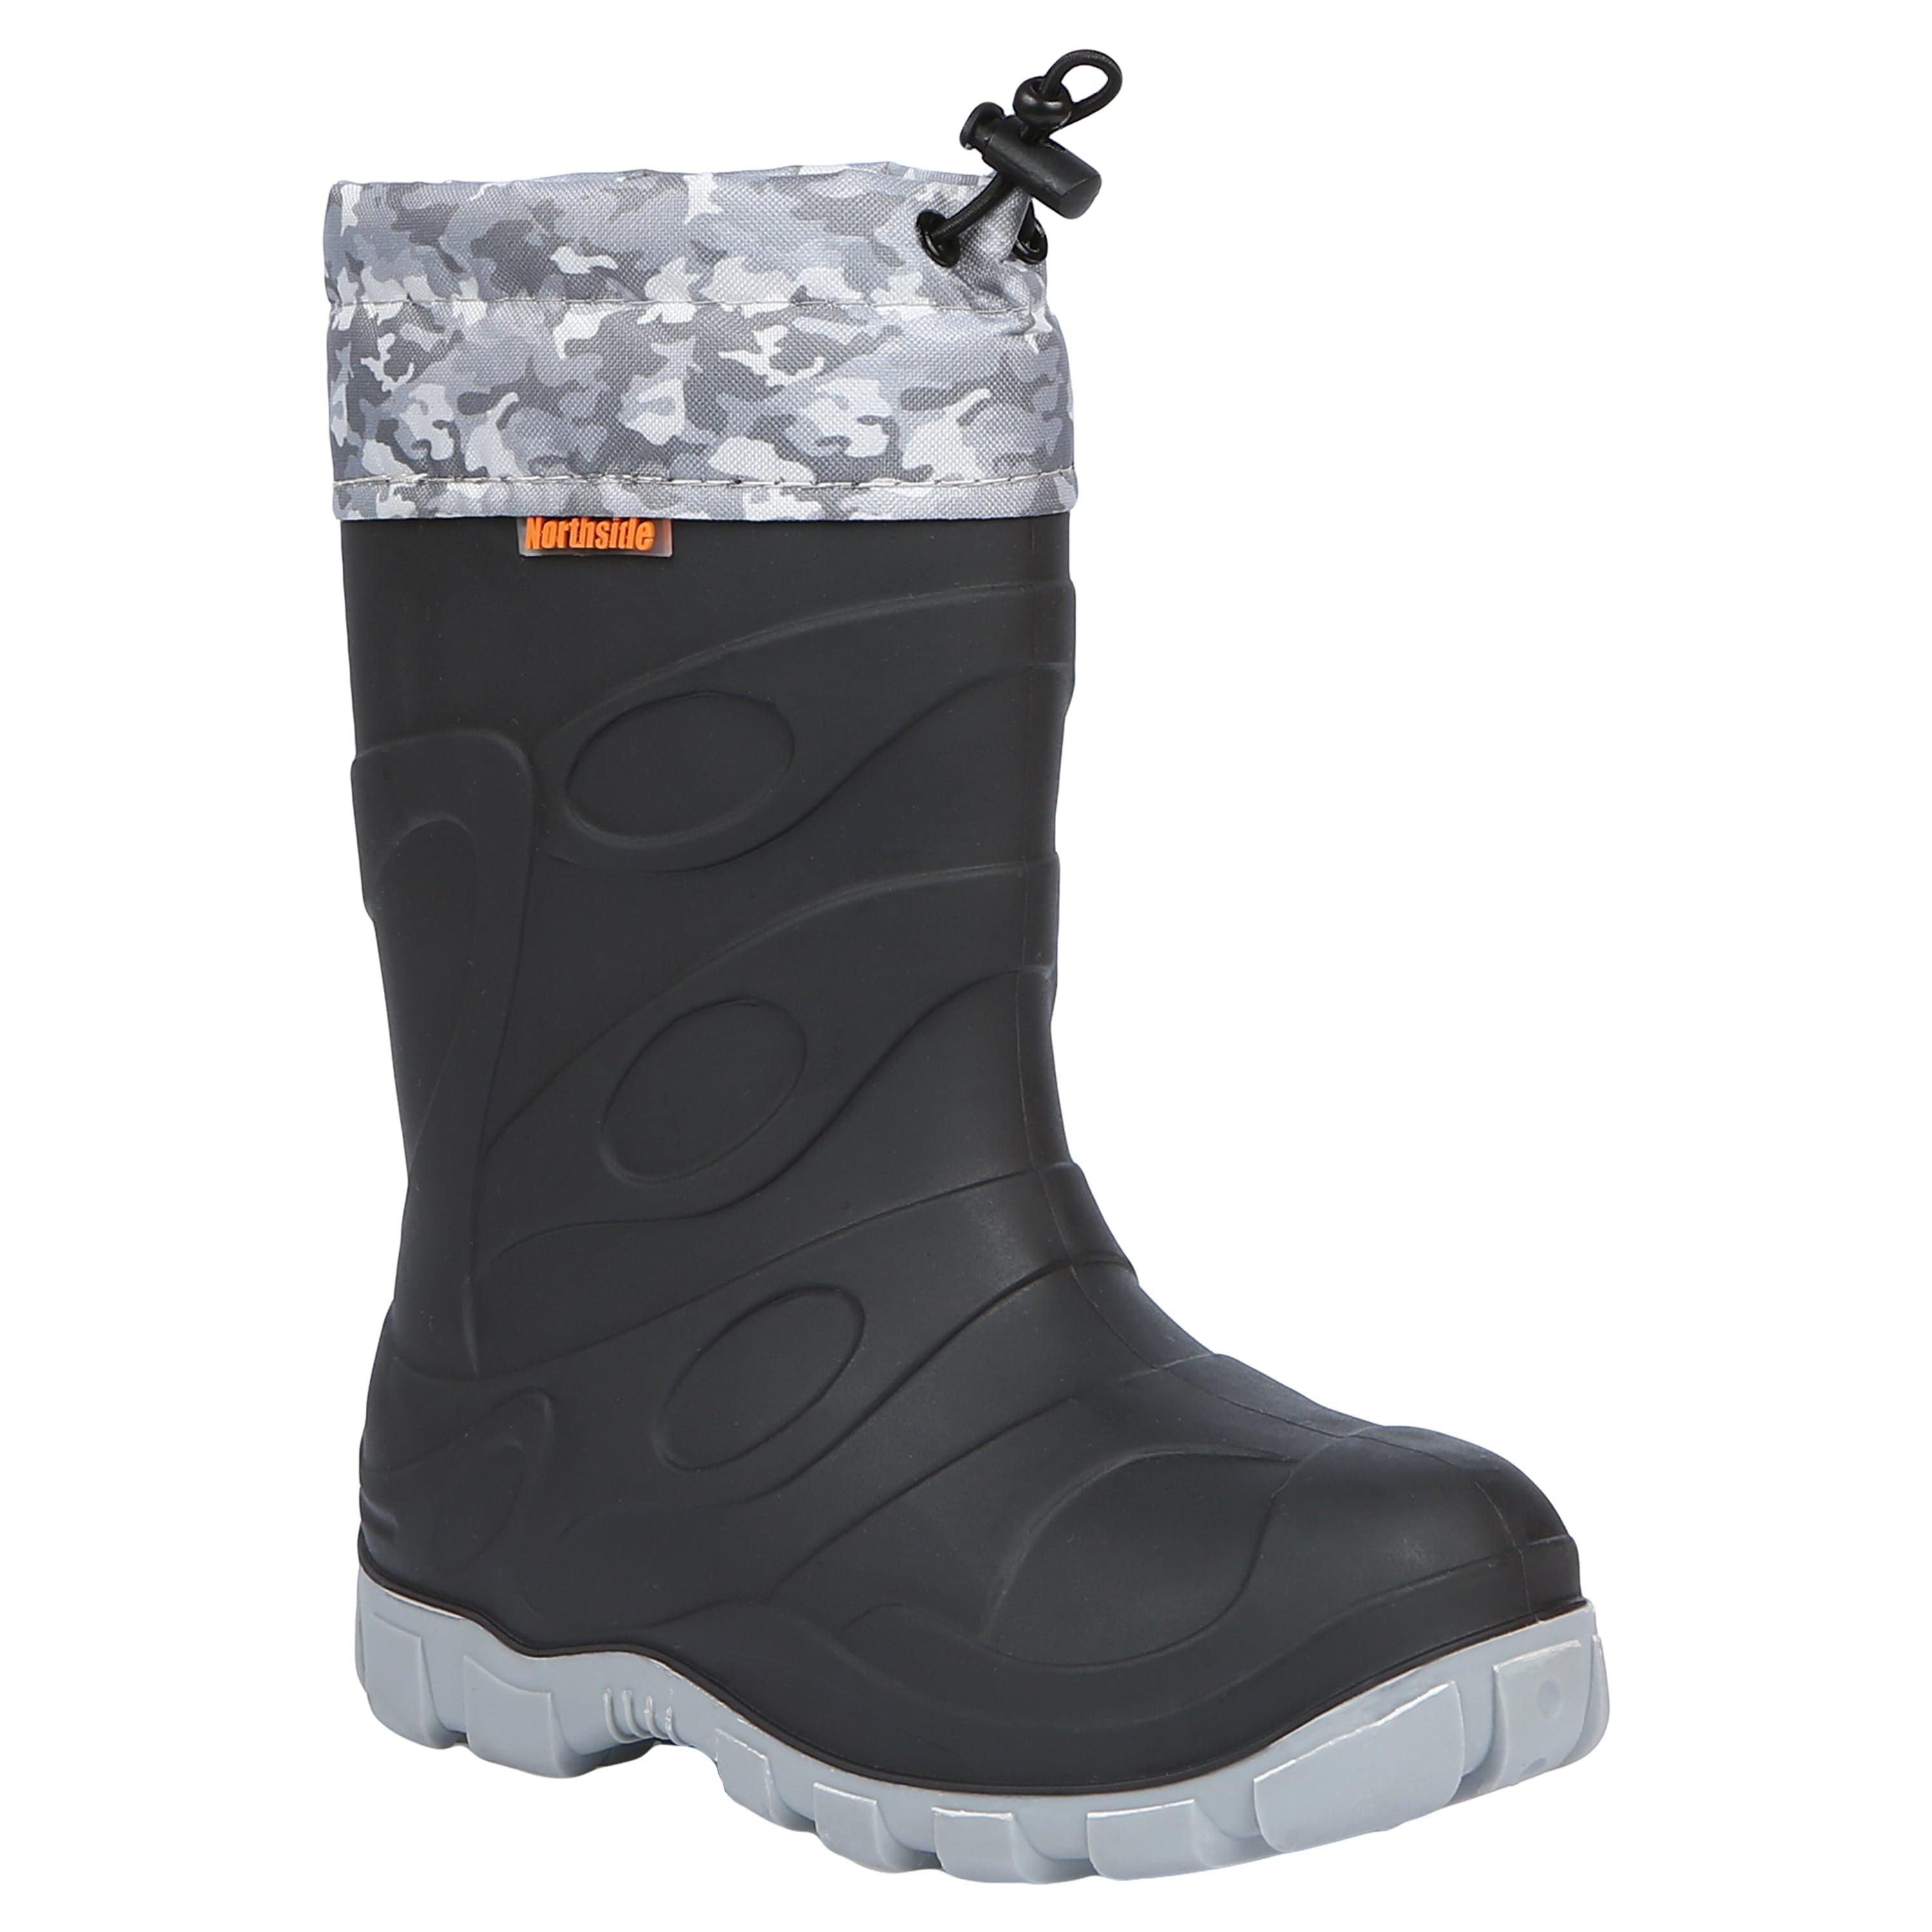 Kid's Orion Waterproof Insulated Rubber All-Weather Boot - Northside USA